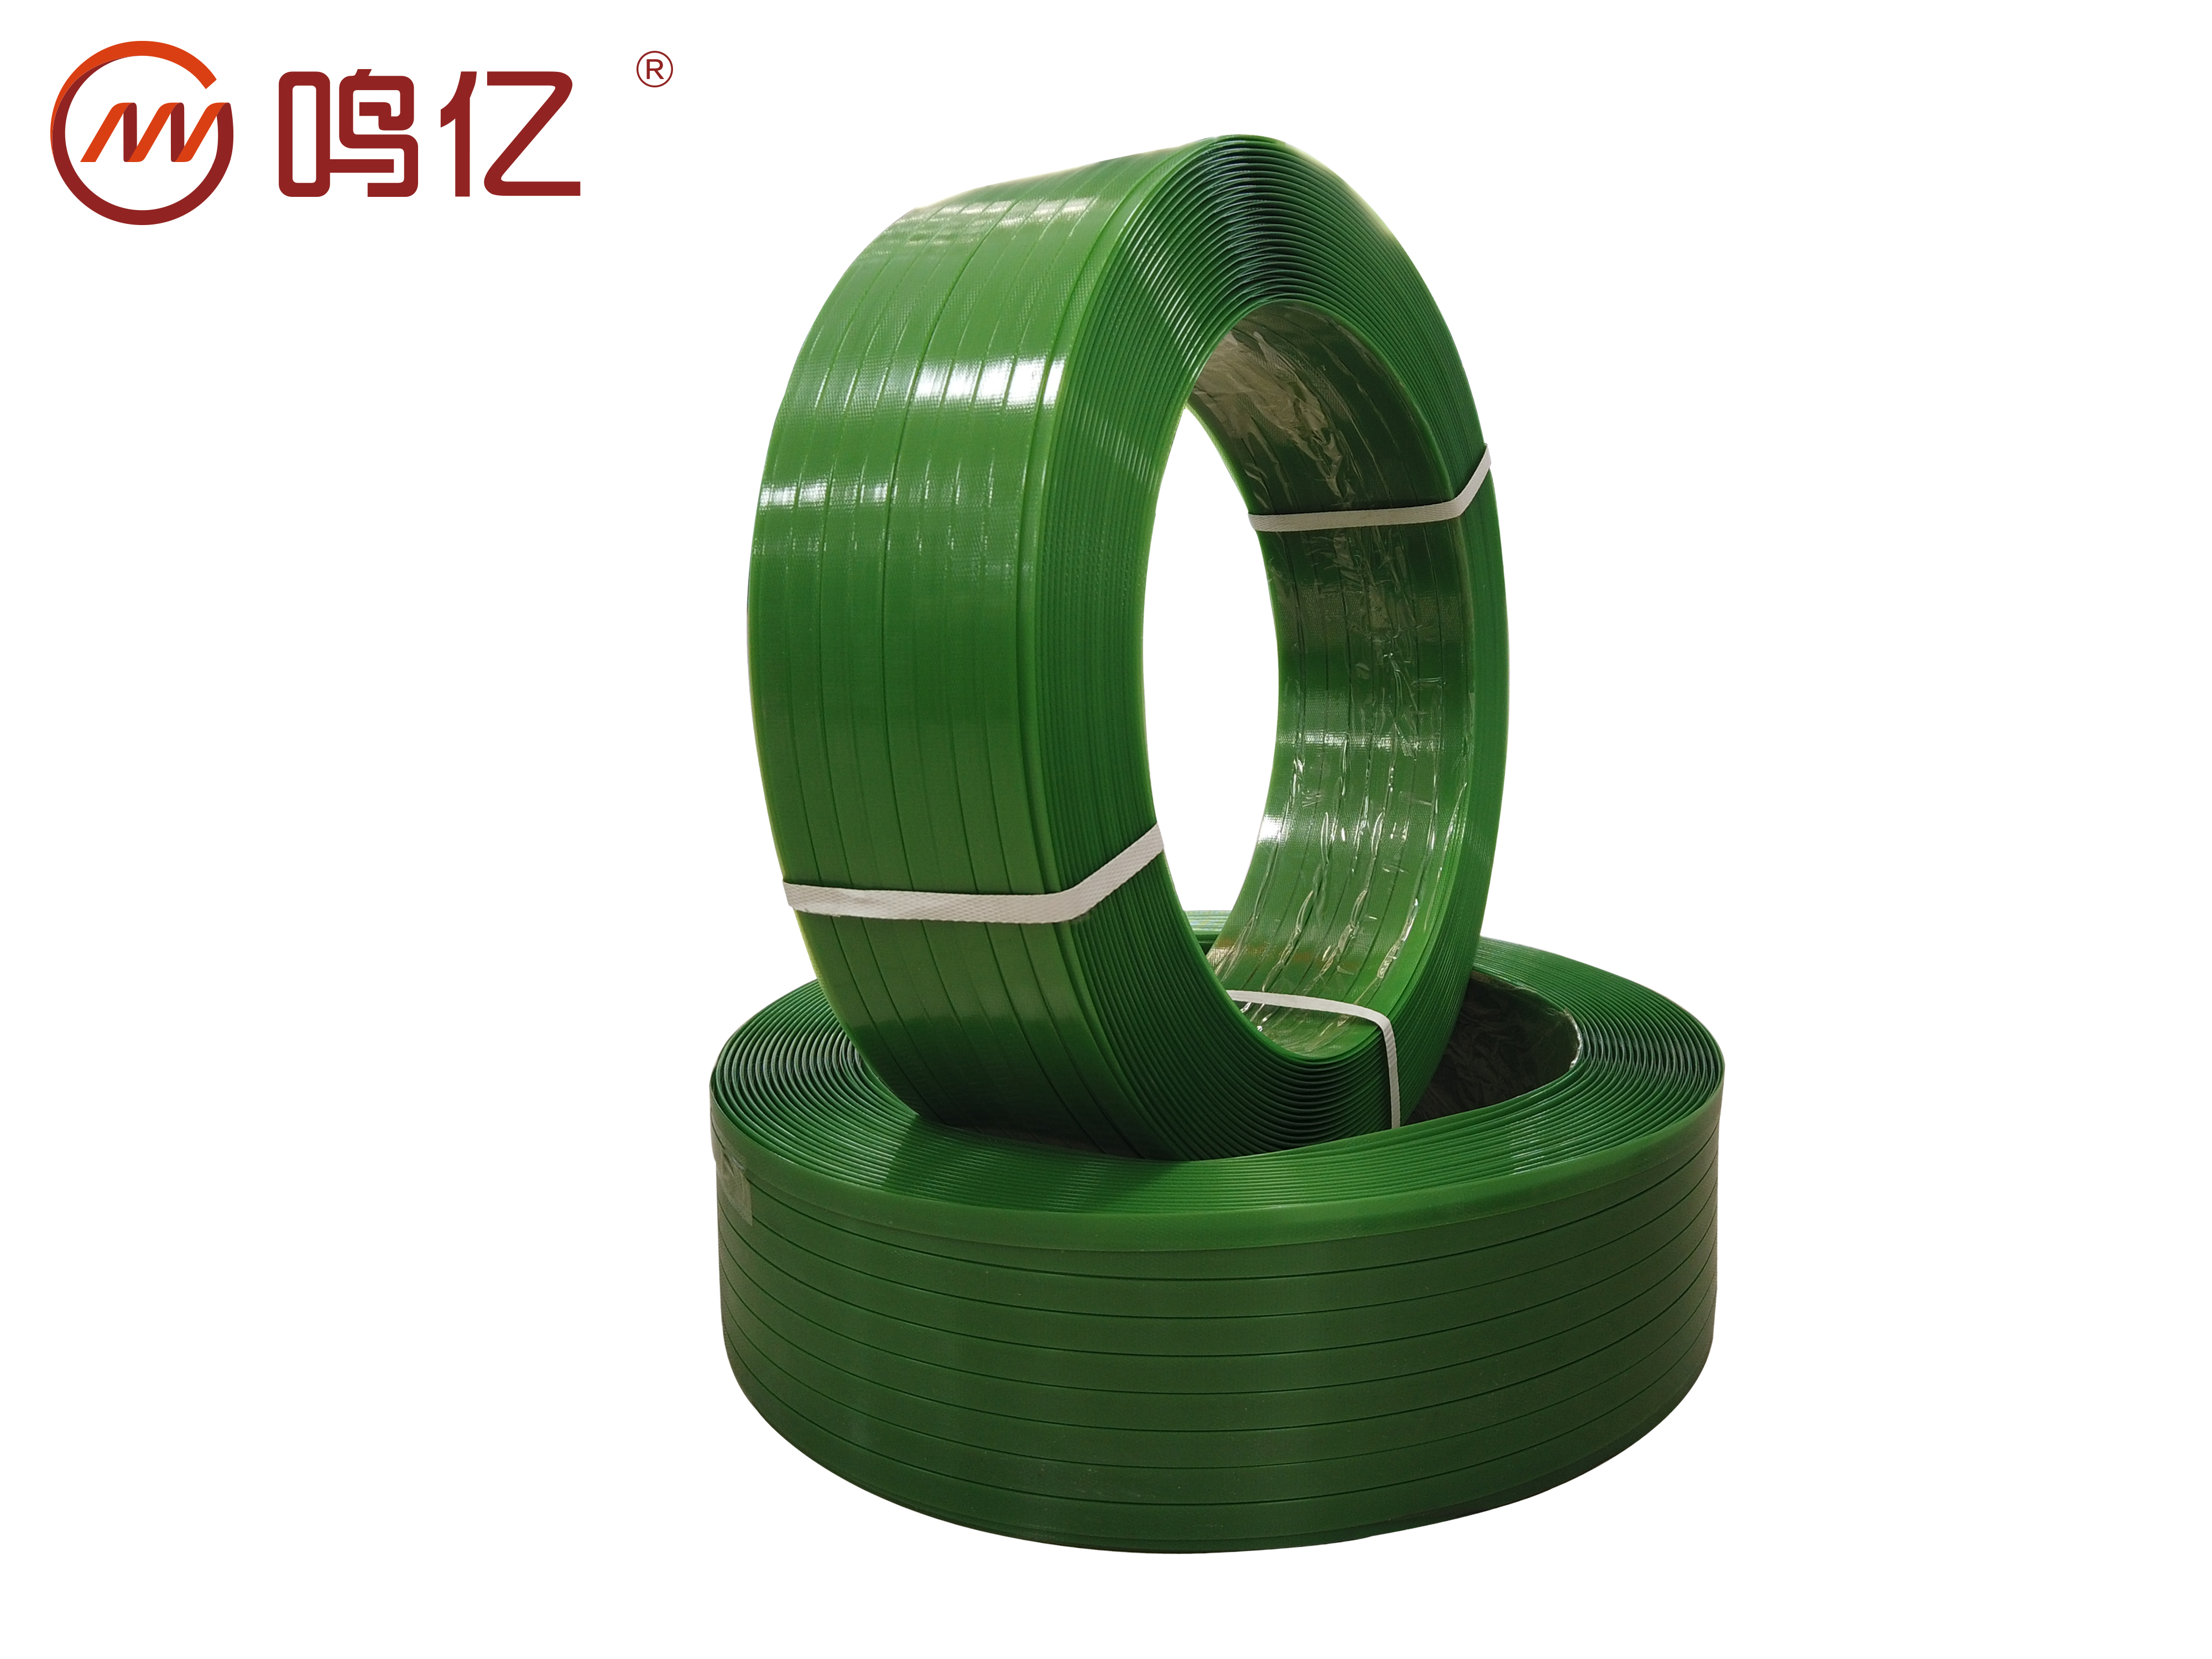 PET strapping manufacturers